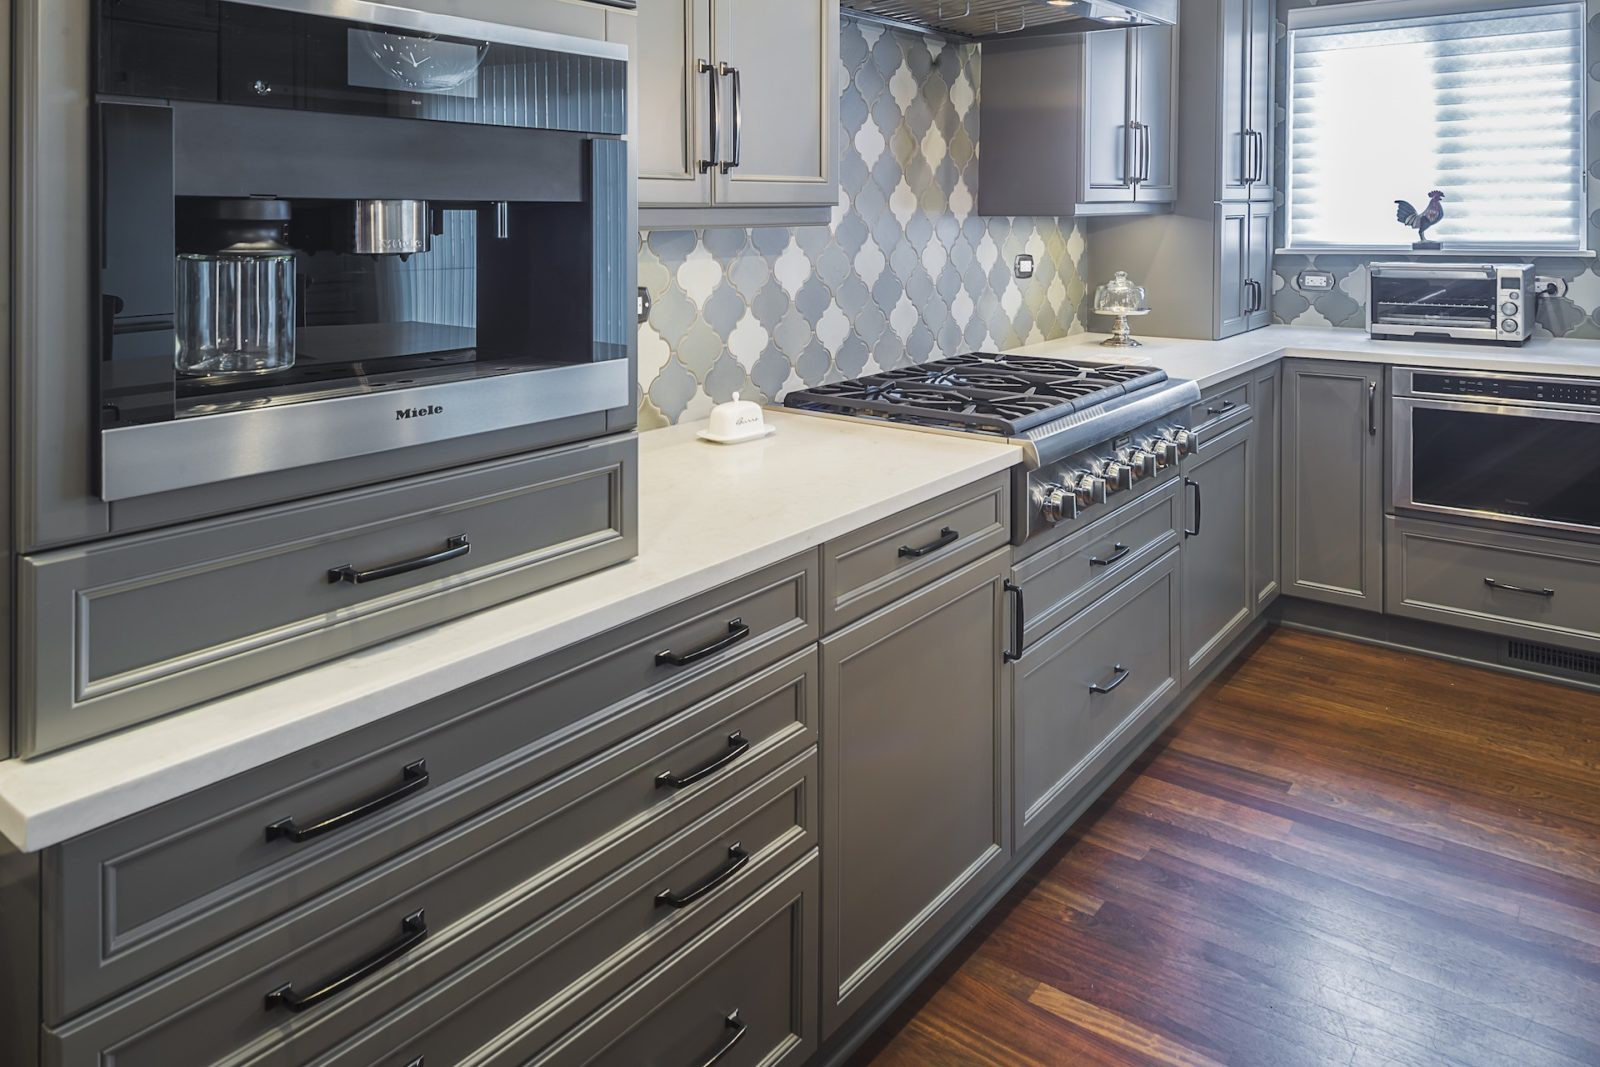 Kitchen Countertops And Cabinets
 Kitchen Cabinets & Countertops Naperville IL